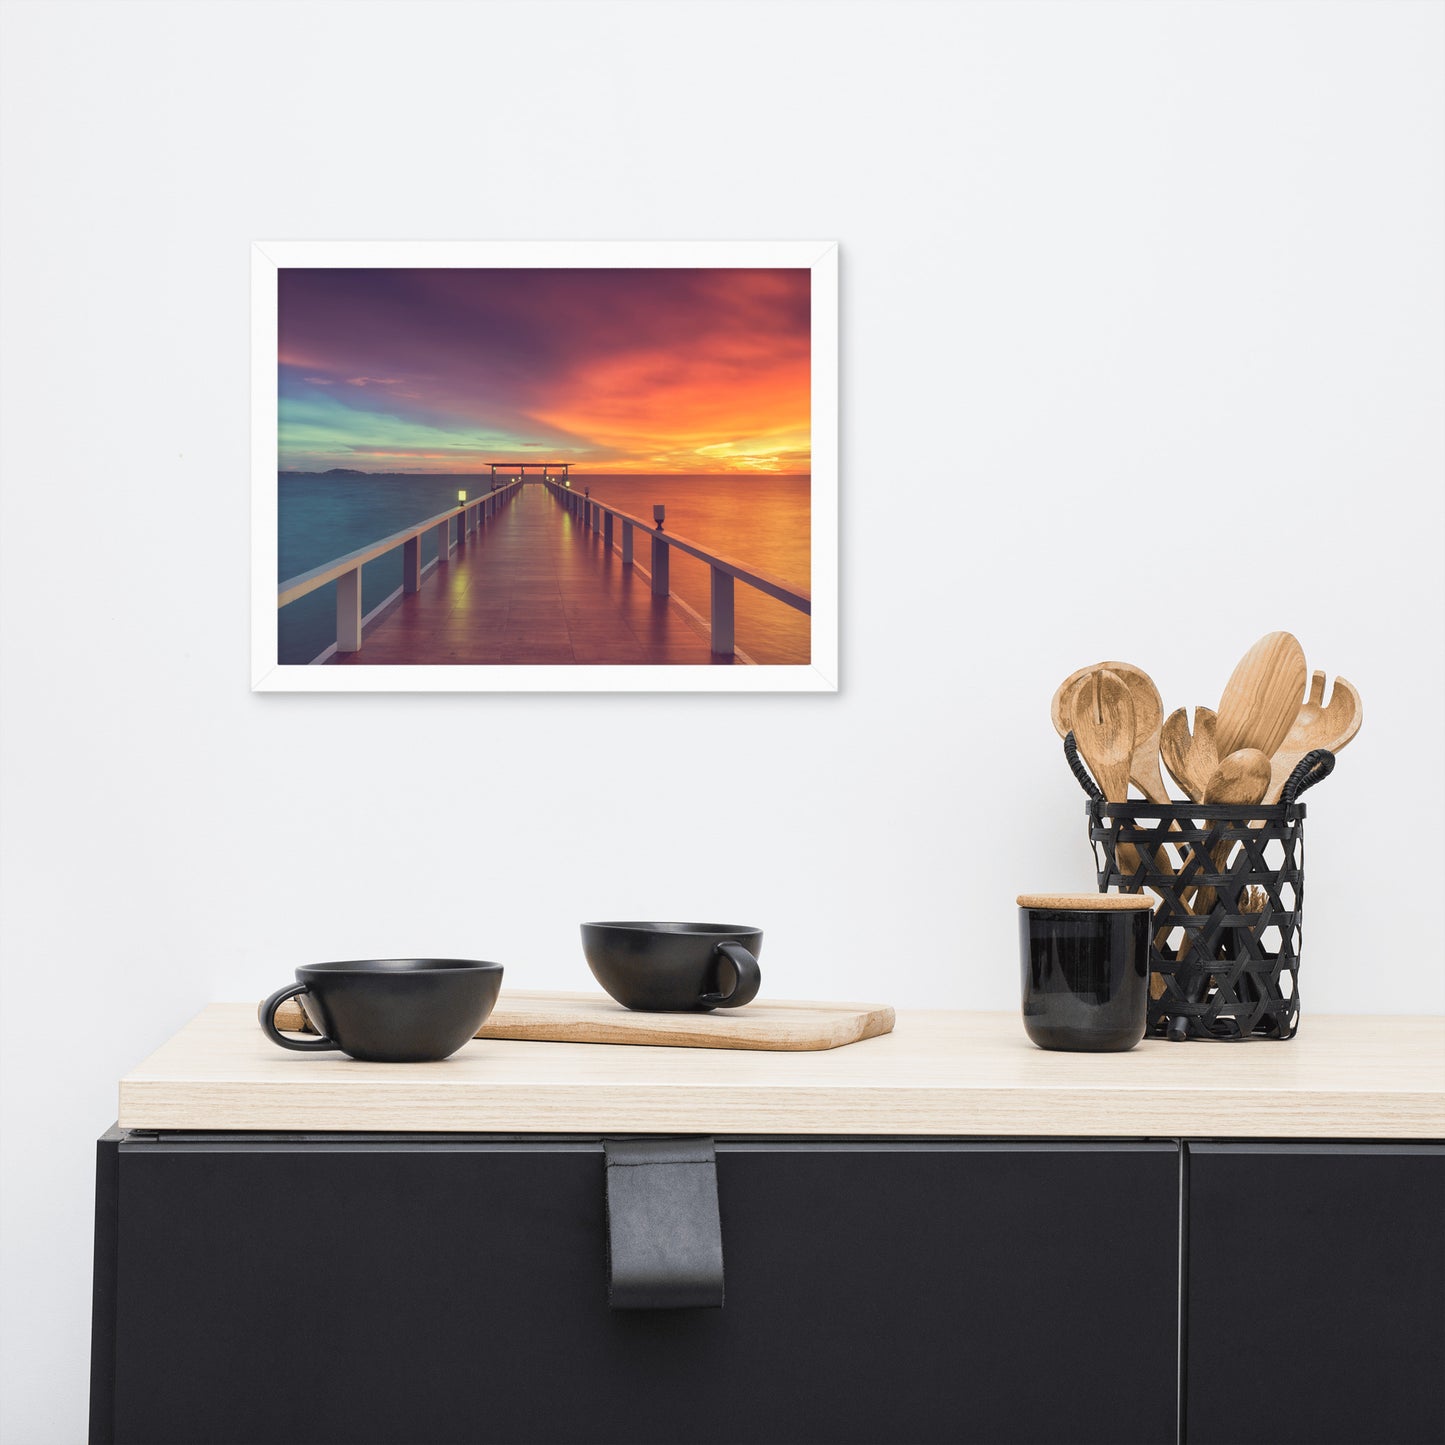 Framed Beach Art: Surreal Wooden Pier At Sunset with Intrigued Effect - Coastal / Seascape / Nature / Landscape Photo Framed Artwork - Wall Decor